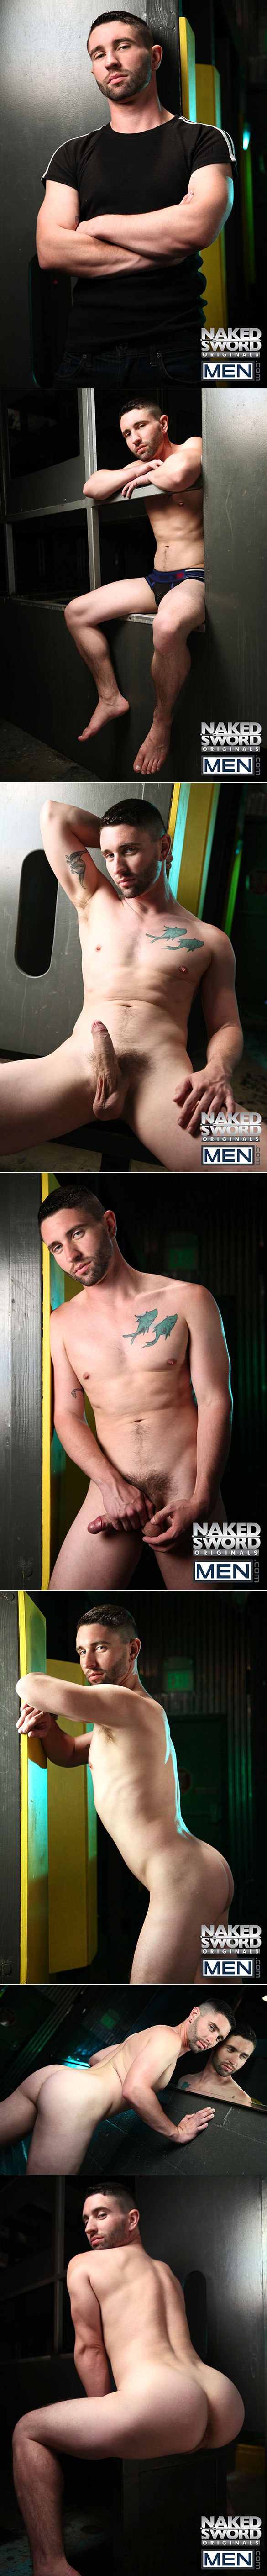 Men.com: Jackson Fillmore and JD Phoenix bang each other in "Biggest Catch, Part 1"